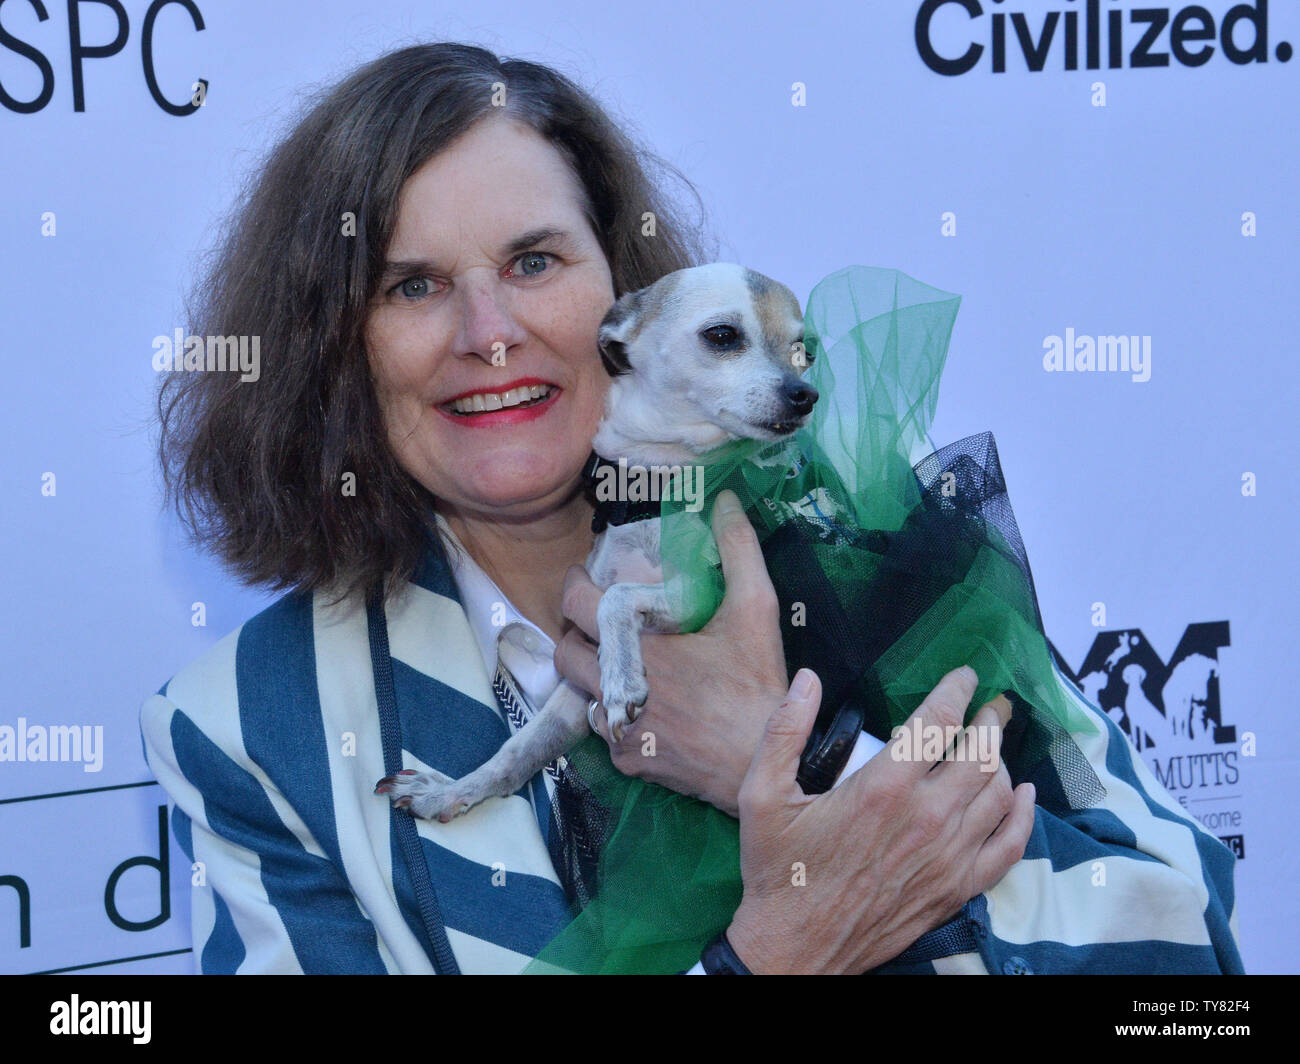 Actress and comedian Paula Poundstone attends the premiere of the motion picture dramatic comedy 'Boundaries' at the Egyptian Theatre in the Hollywood section of Los Angeles on June 19, 2018. The film tells the story of Laura and her son Henry, who are forced to drive her estranged care-free pot dealing father across country after he's kicked out of yet another nursing home.  Photo by Jim Ruymen/UPI Stock Photo